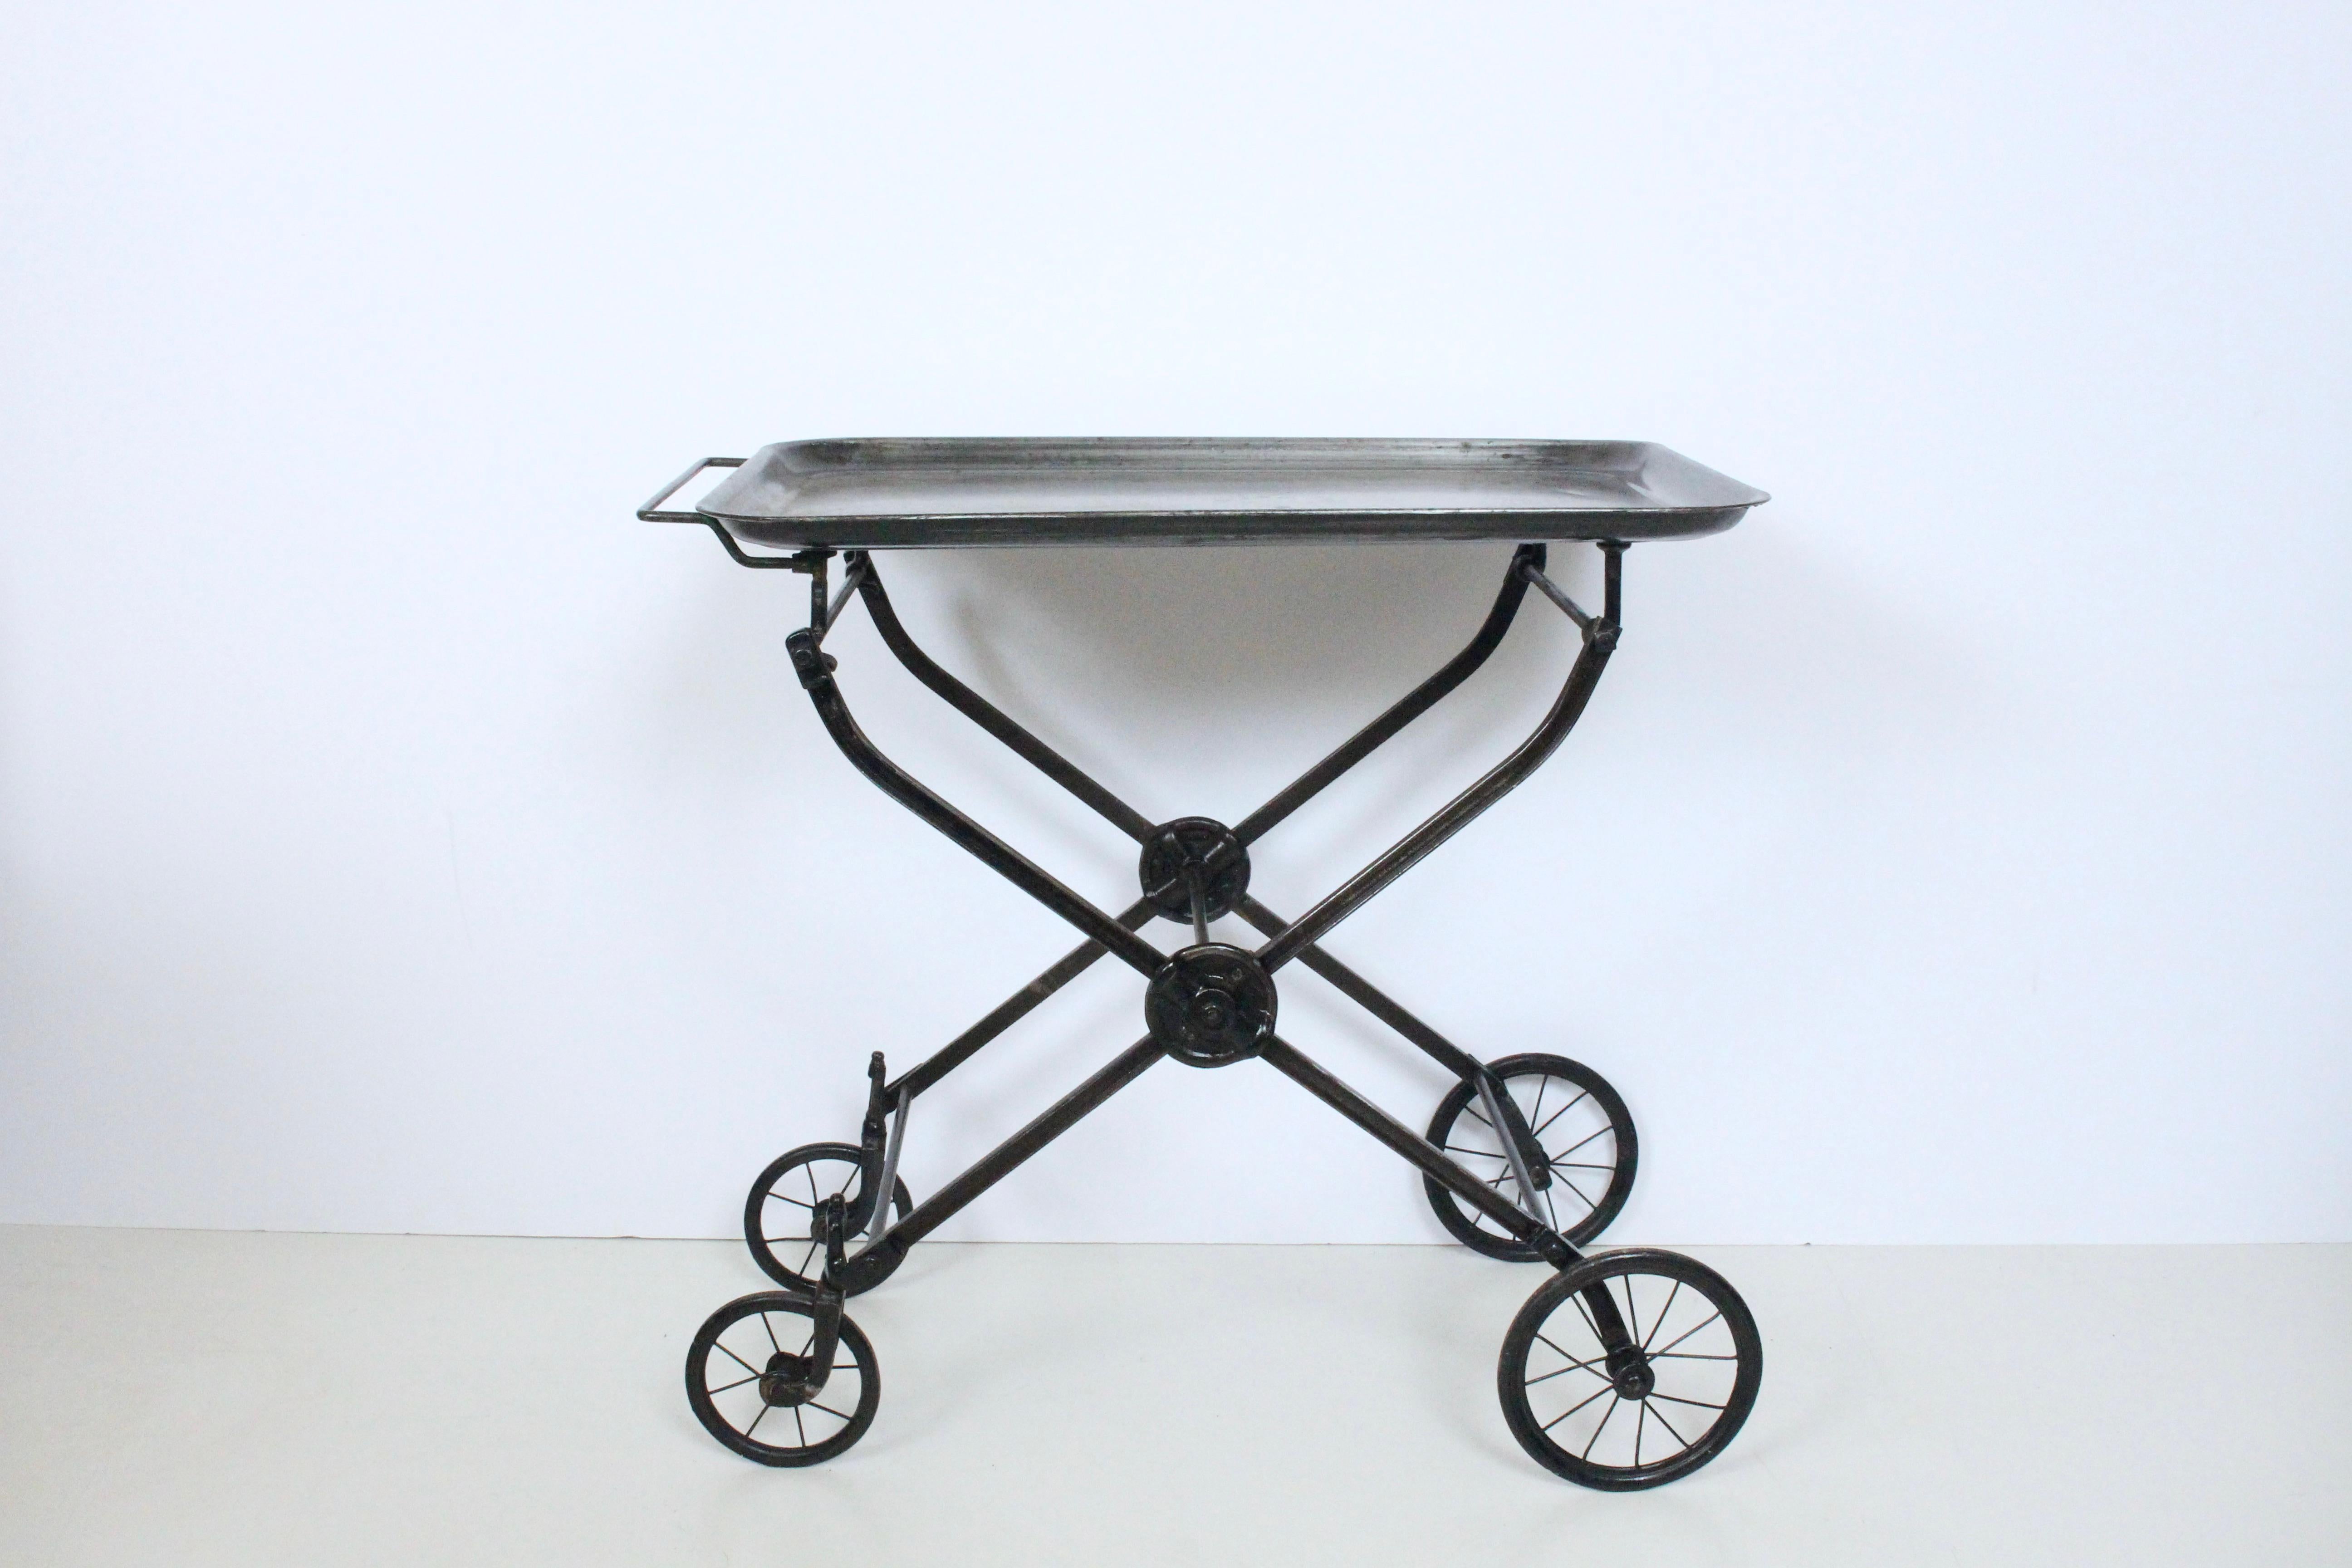 Handled rolling and folding iron hotel beverage trolley, serving cart, dry bar. Tea. Coffee. Plants. Display. Featuring a rectangular larger lipped tray, sturdy Iron crossbar and castings with spoked wheel detail. Uncommon. Industrial. Fine design. 